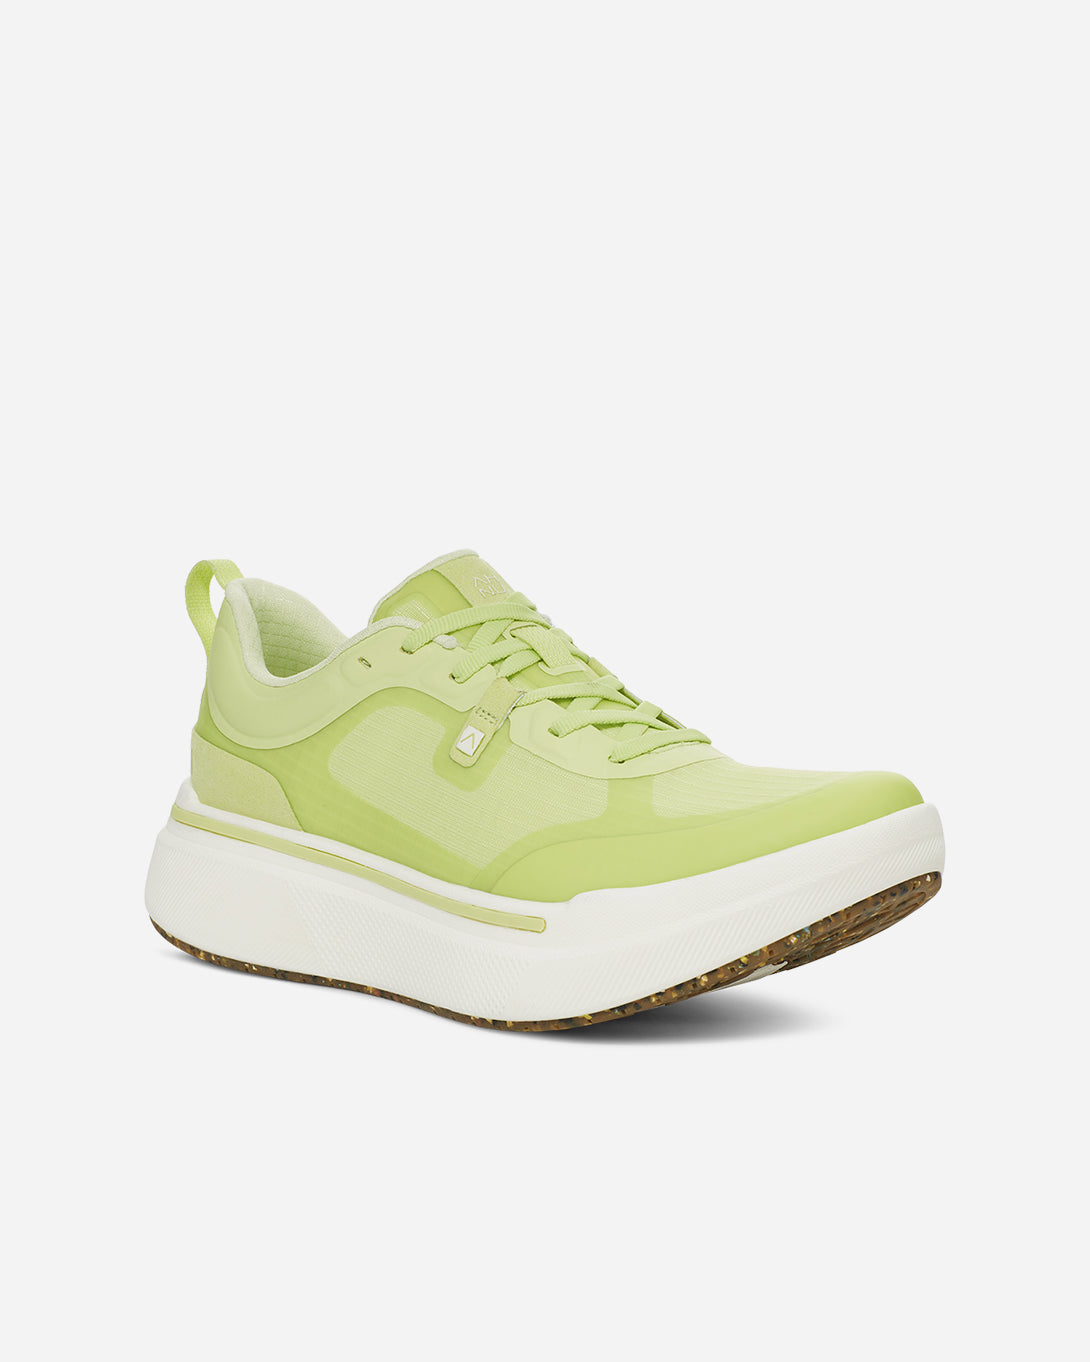 Shadow Lime/White Sequence 1 Low Ahnu Sneaker